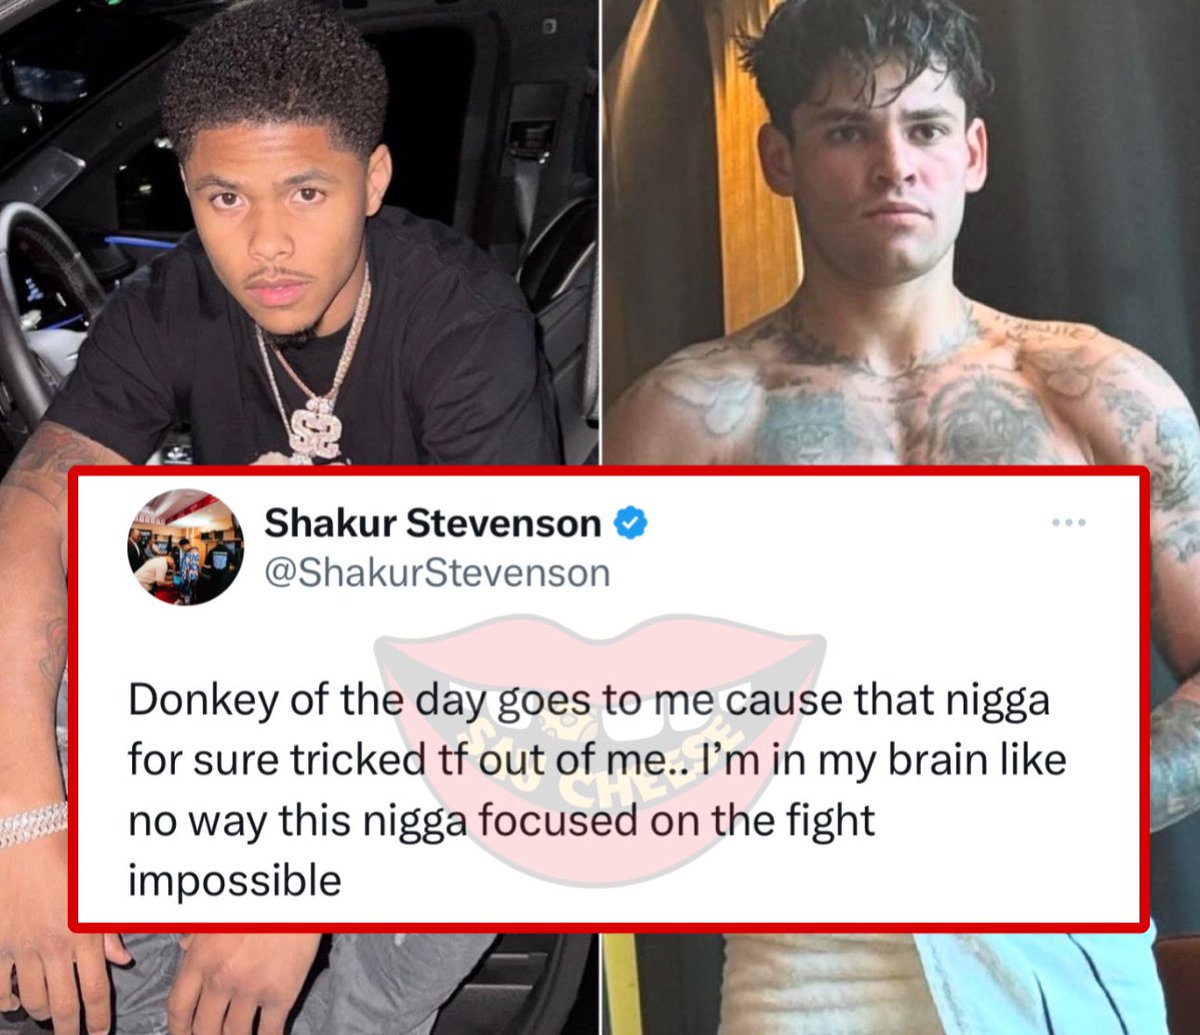 Shakur Stevenson gives himself the donkey of the day for doubting Ryan Garcia: “That n**** for sure tricked tf out of me”